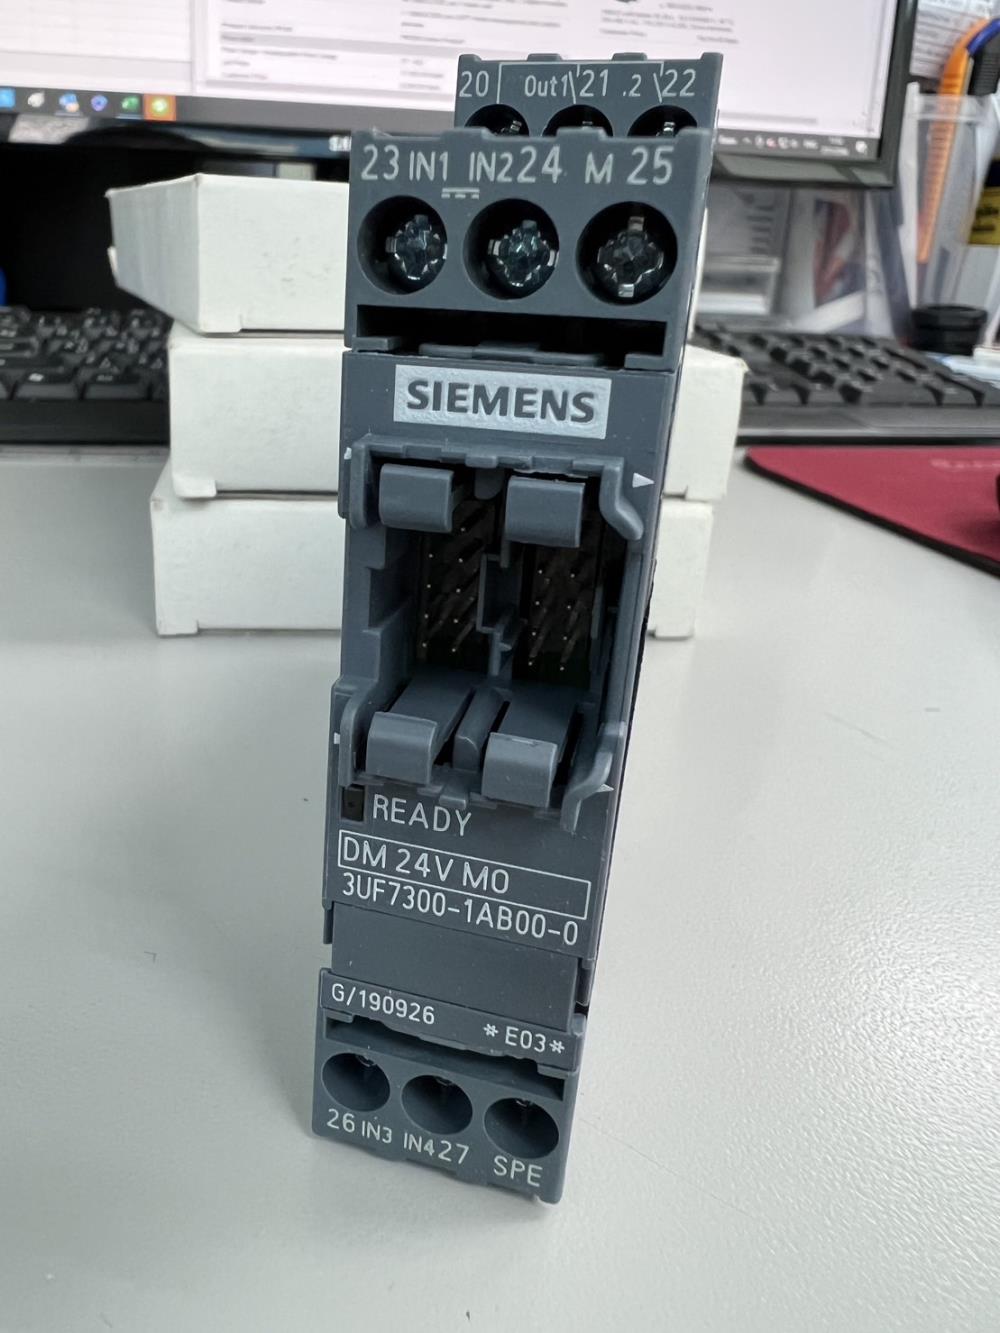 Siemens 3UF7300-1AB00-0 Digital module,Siemens 3UF7300-1AB00-0 Digital module Digital module, 4 inputs and 2 relay outputs, input voltage 24 V DC, relay outputs monostable, max. 2 digital modules, for SIMOCODE pro V basic unit,Siemens 3UF7300-1AB00-0 Digital module,Automation and Electronics/Access Control Systems